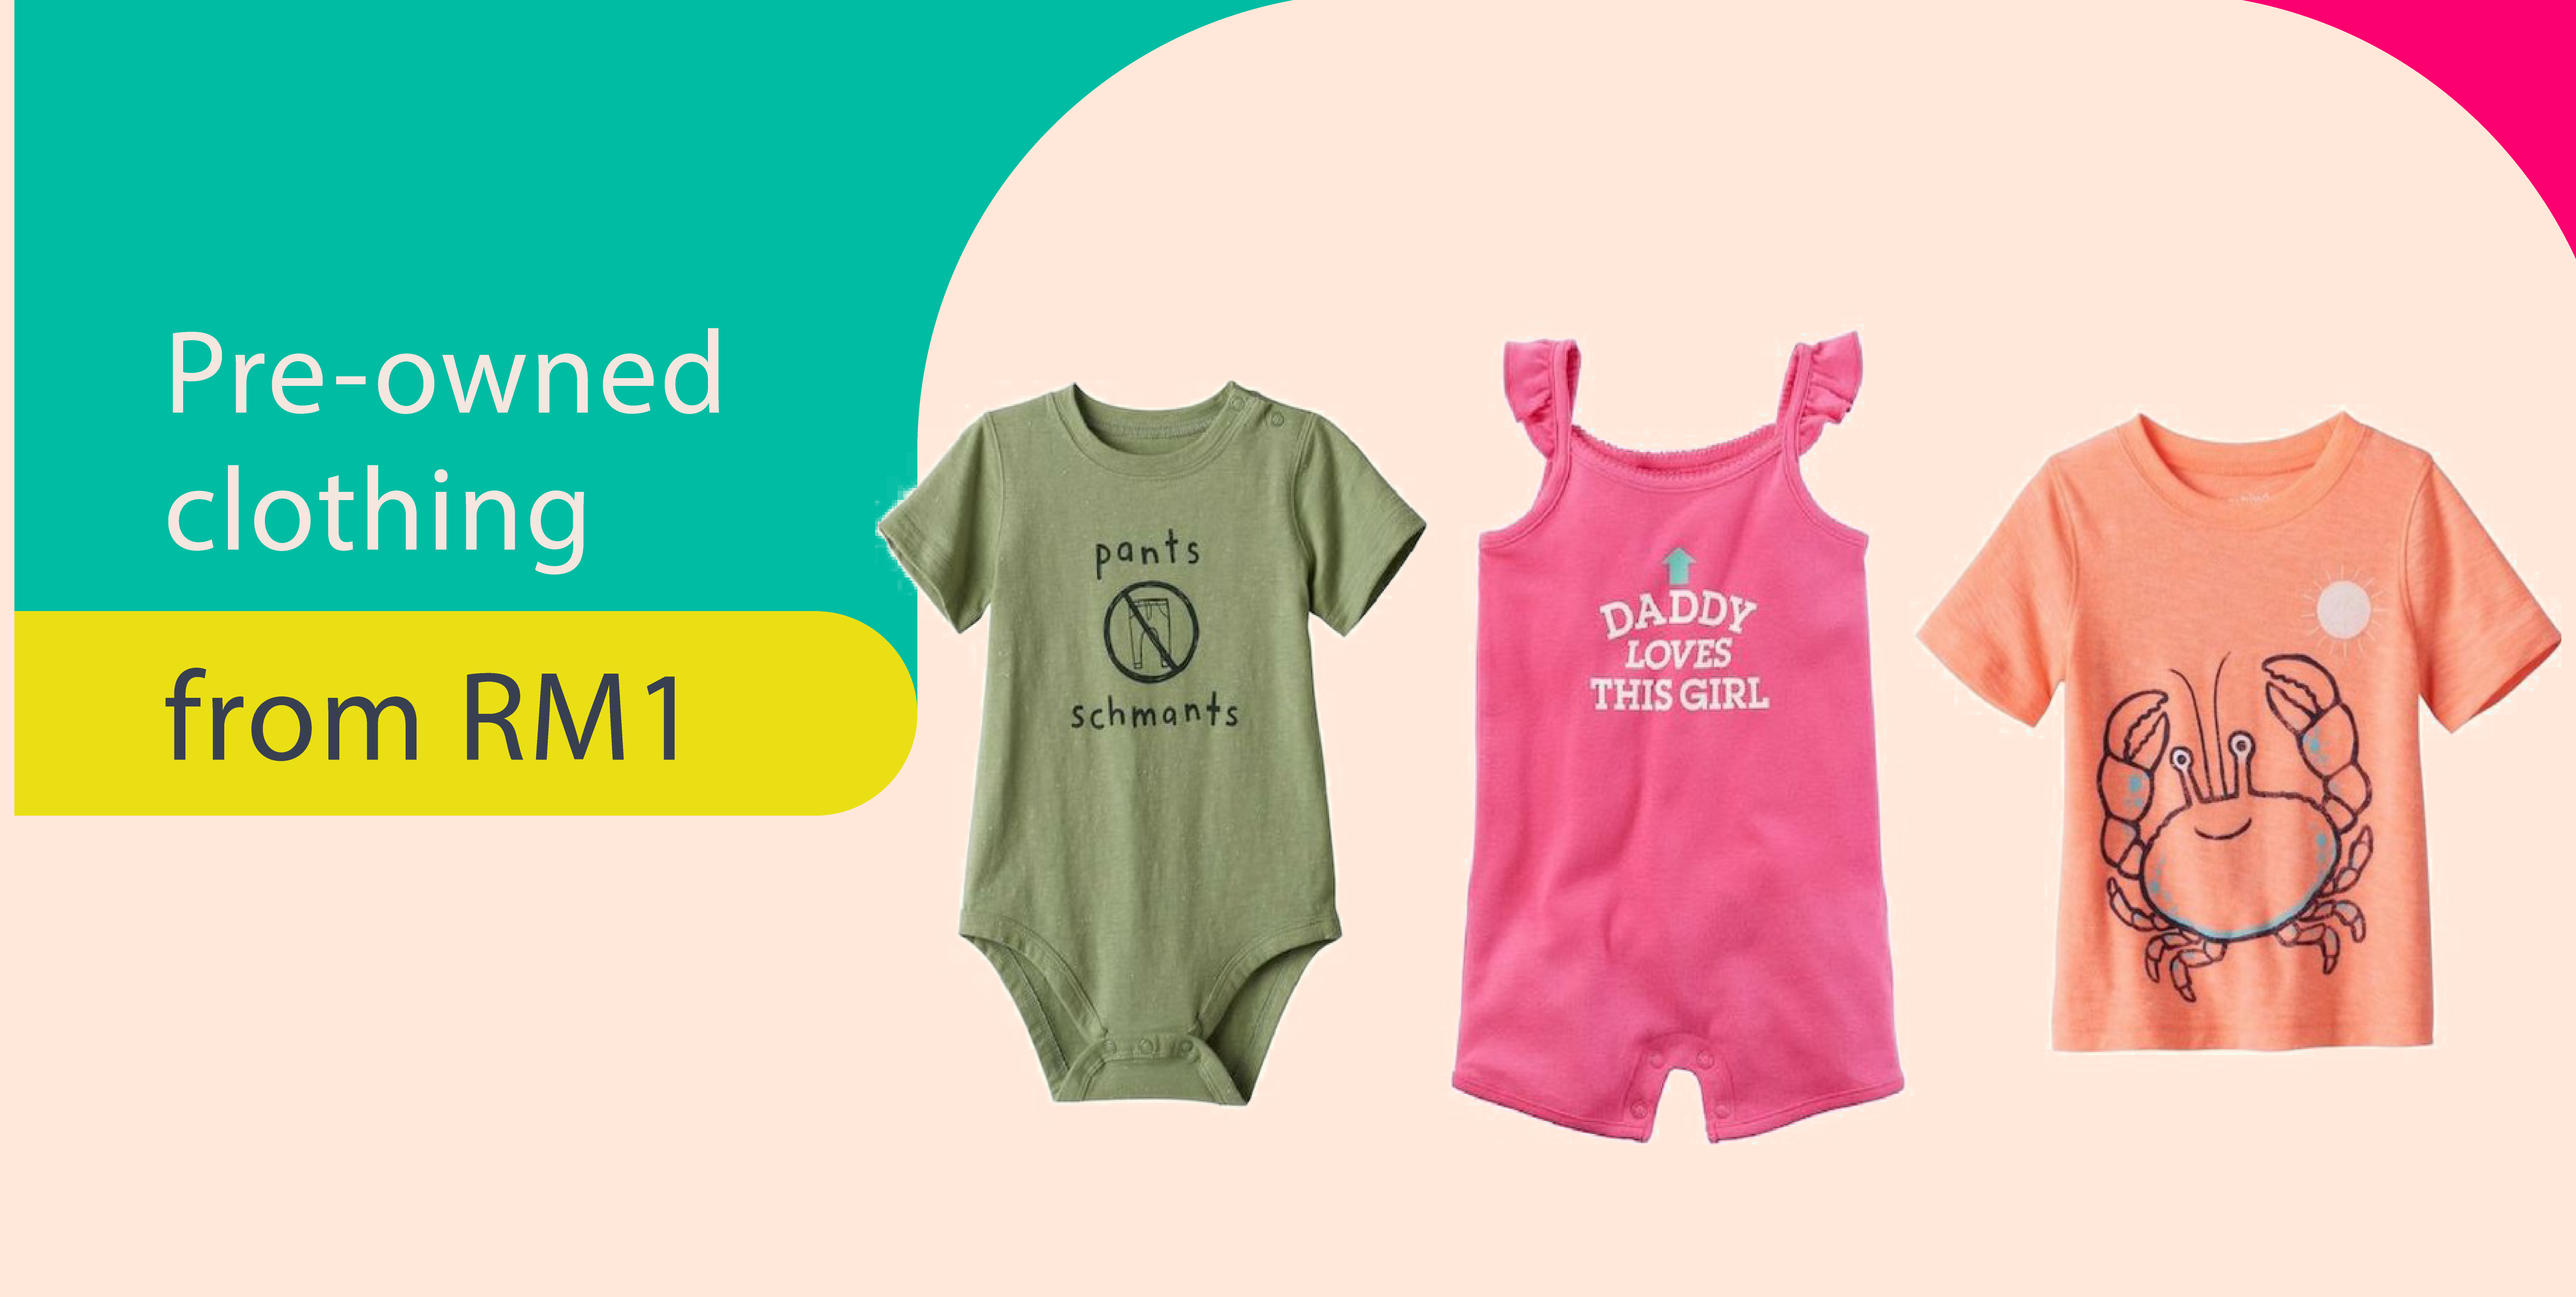  | Mikali - your one stop baby stuff solutions